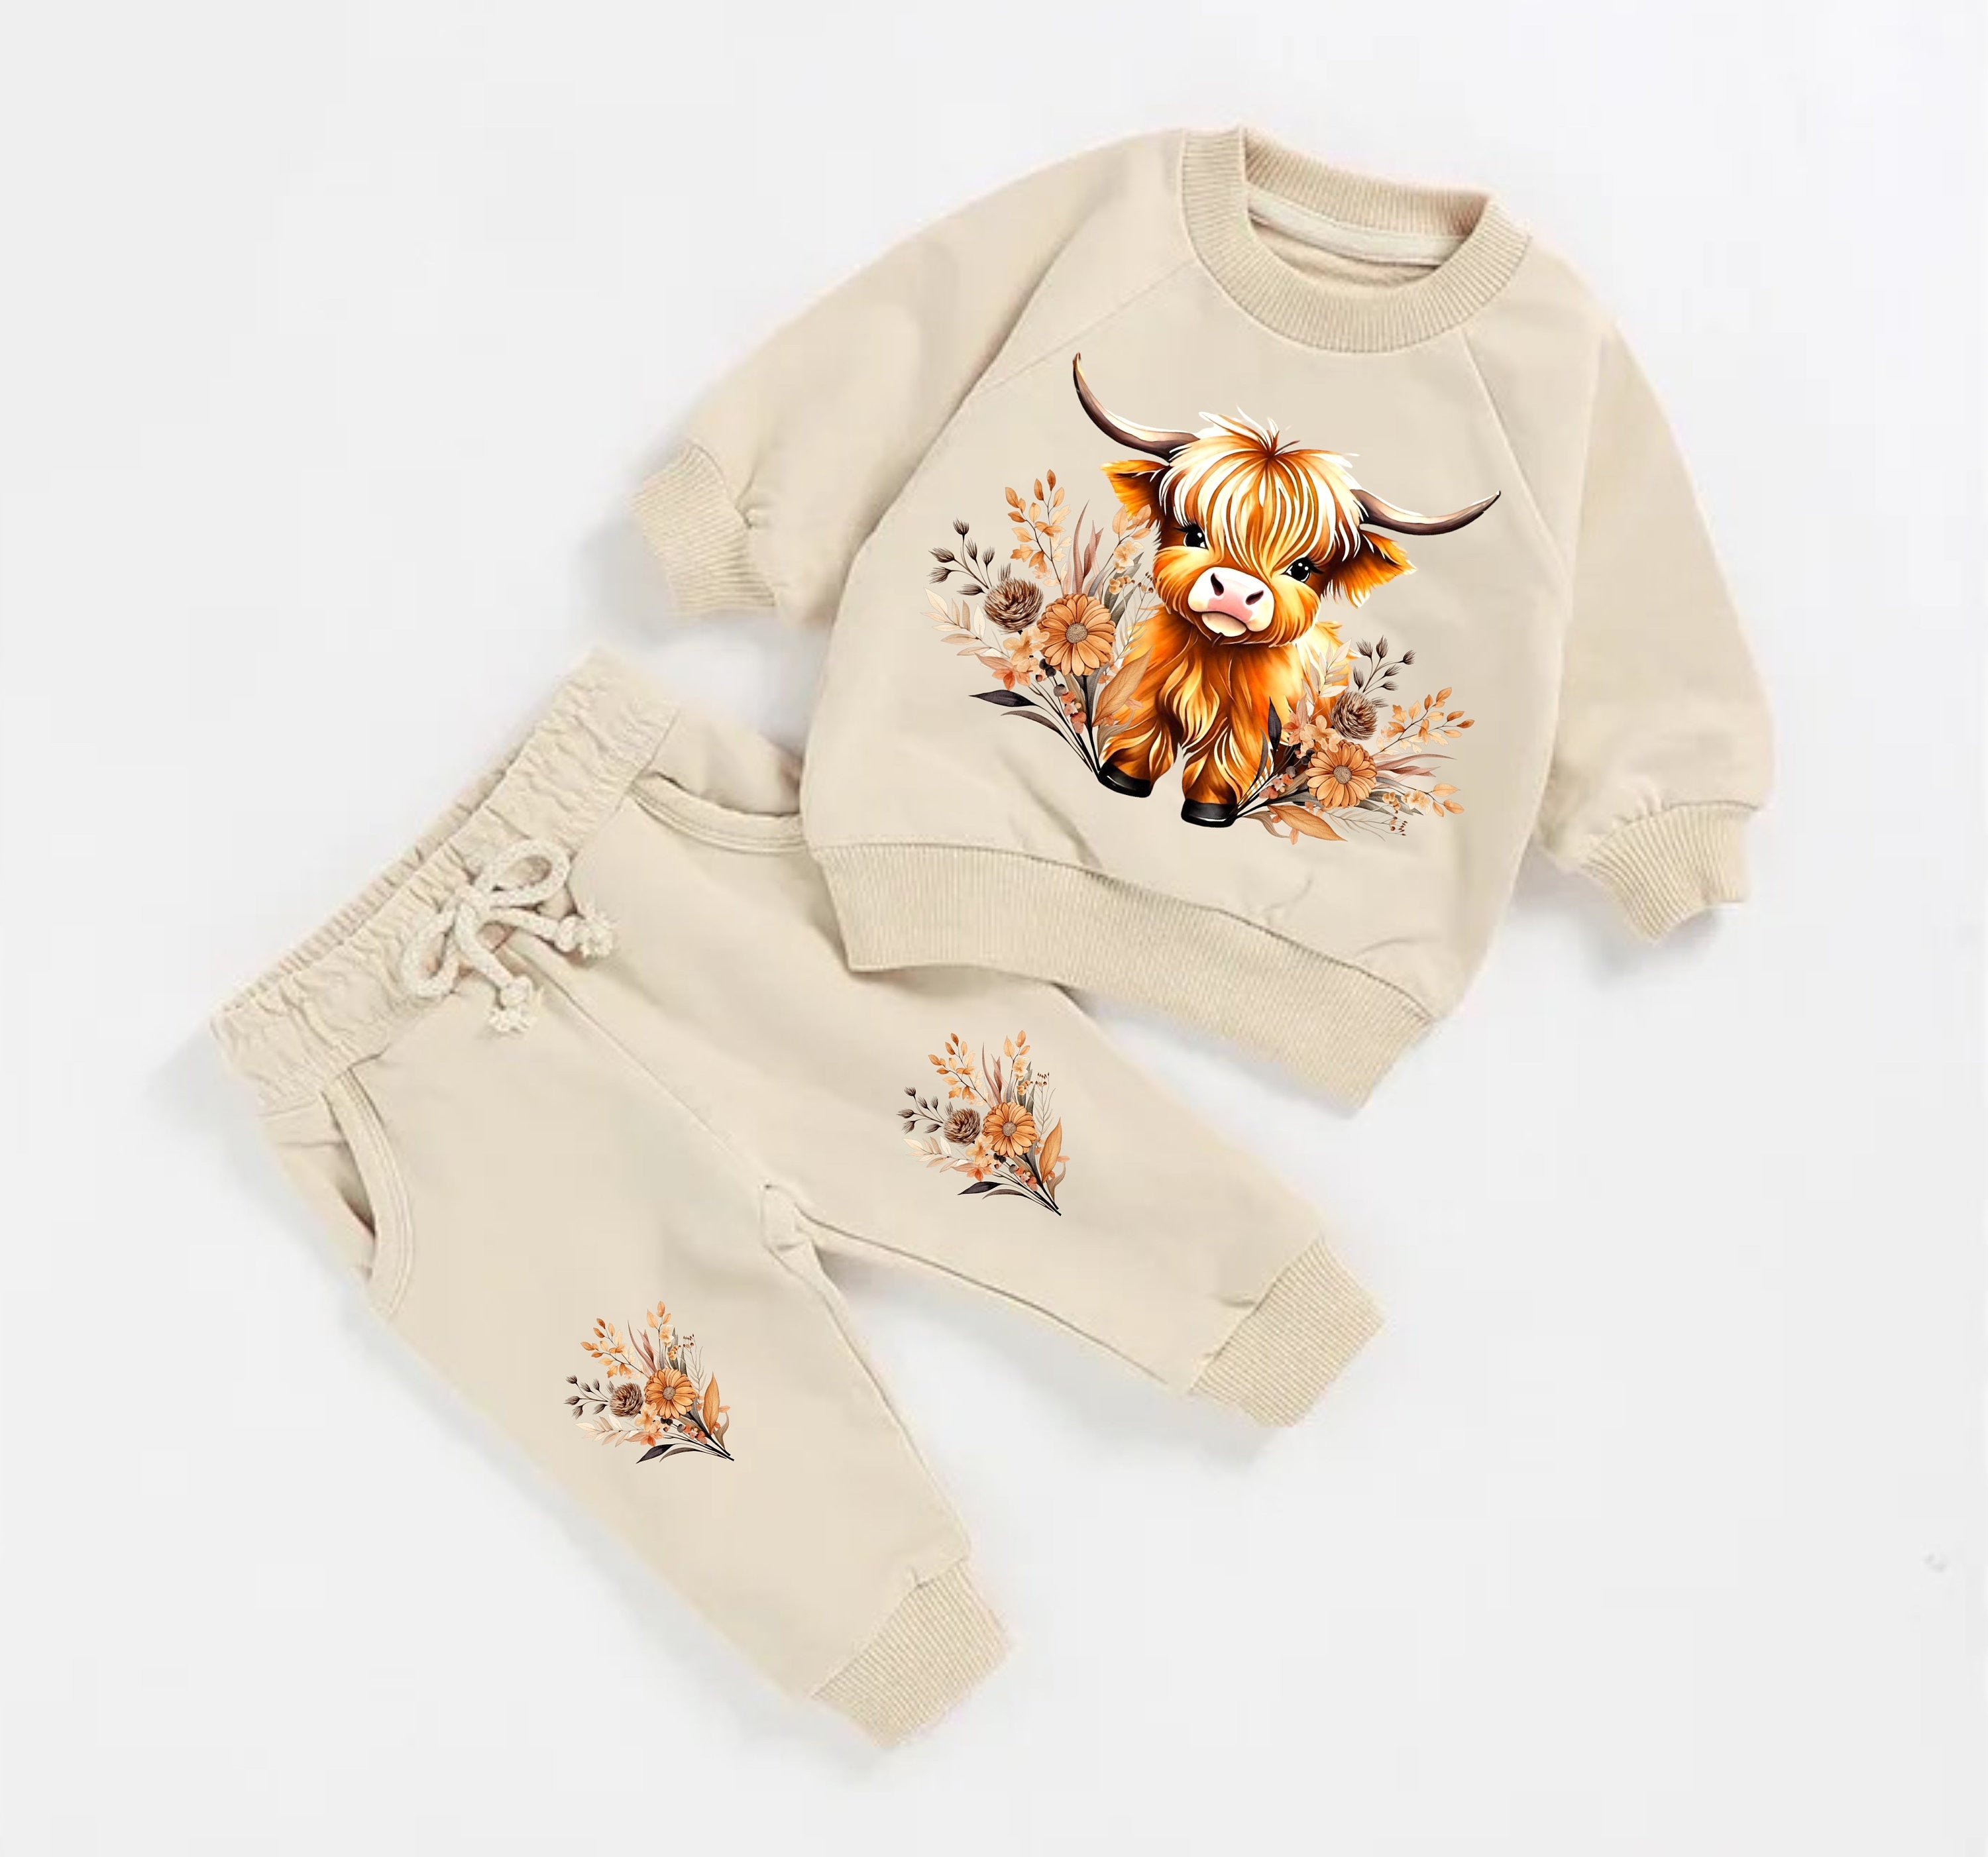 Highland cow French Terry Baby Outfit set sweatshirt and pants / baby clothes / soft / sweater / baby girl boy / baby shower / baby gift